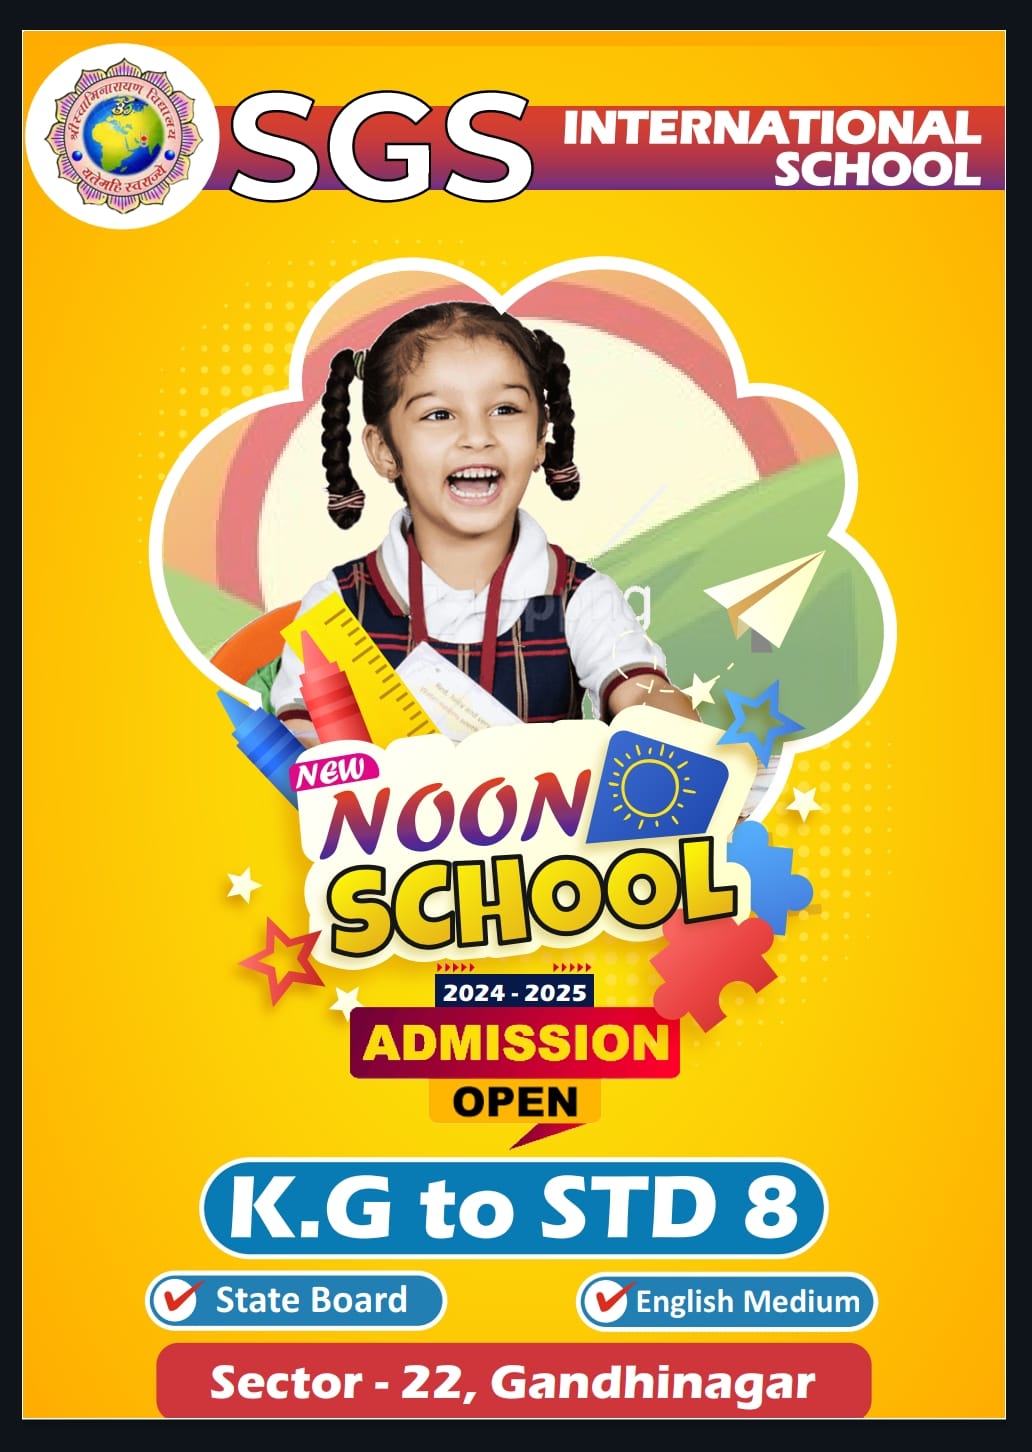 Admission open For 2024-2025 SGS International School. Now Noon School is available in Gurukul